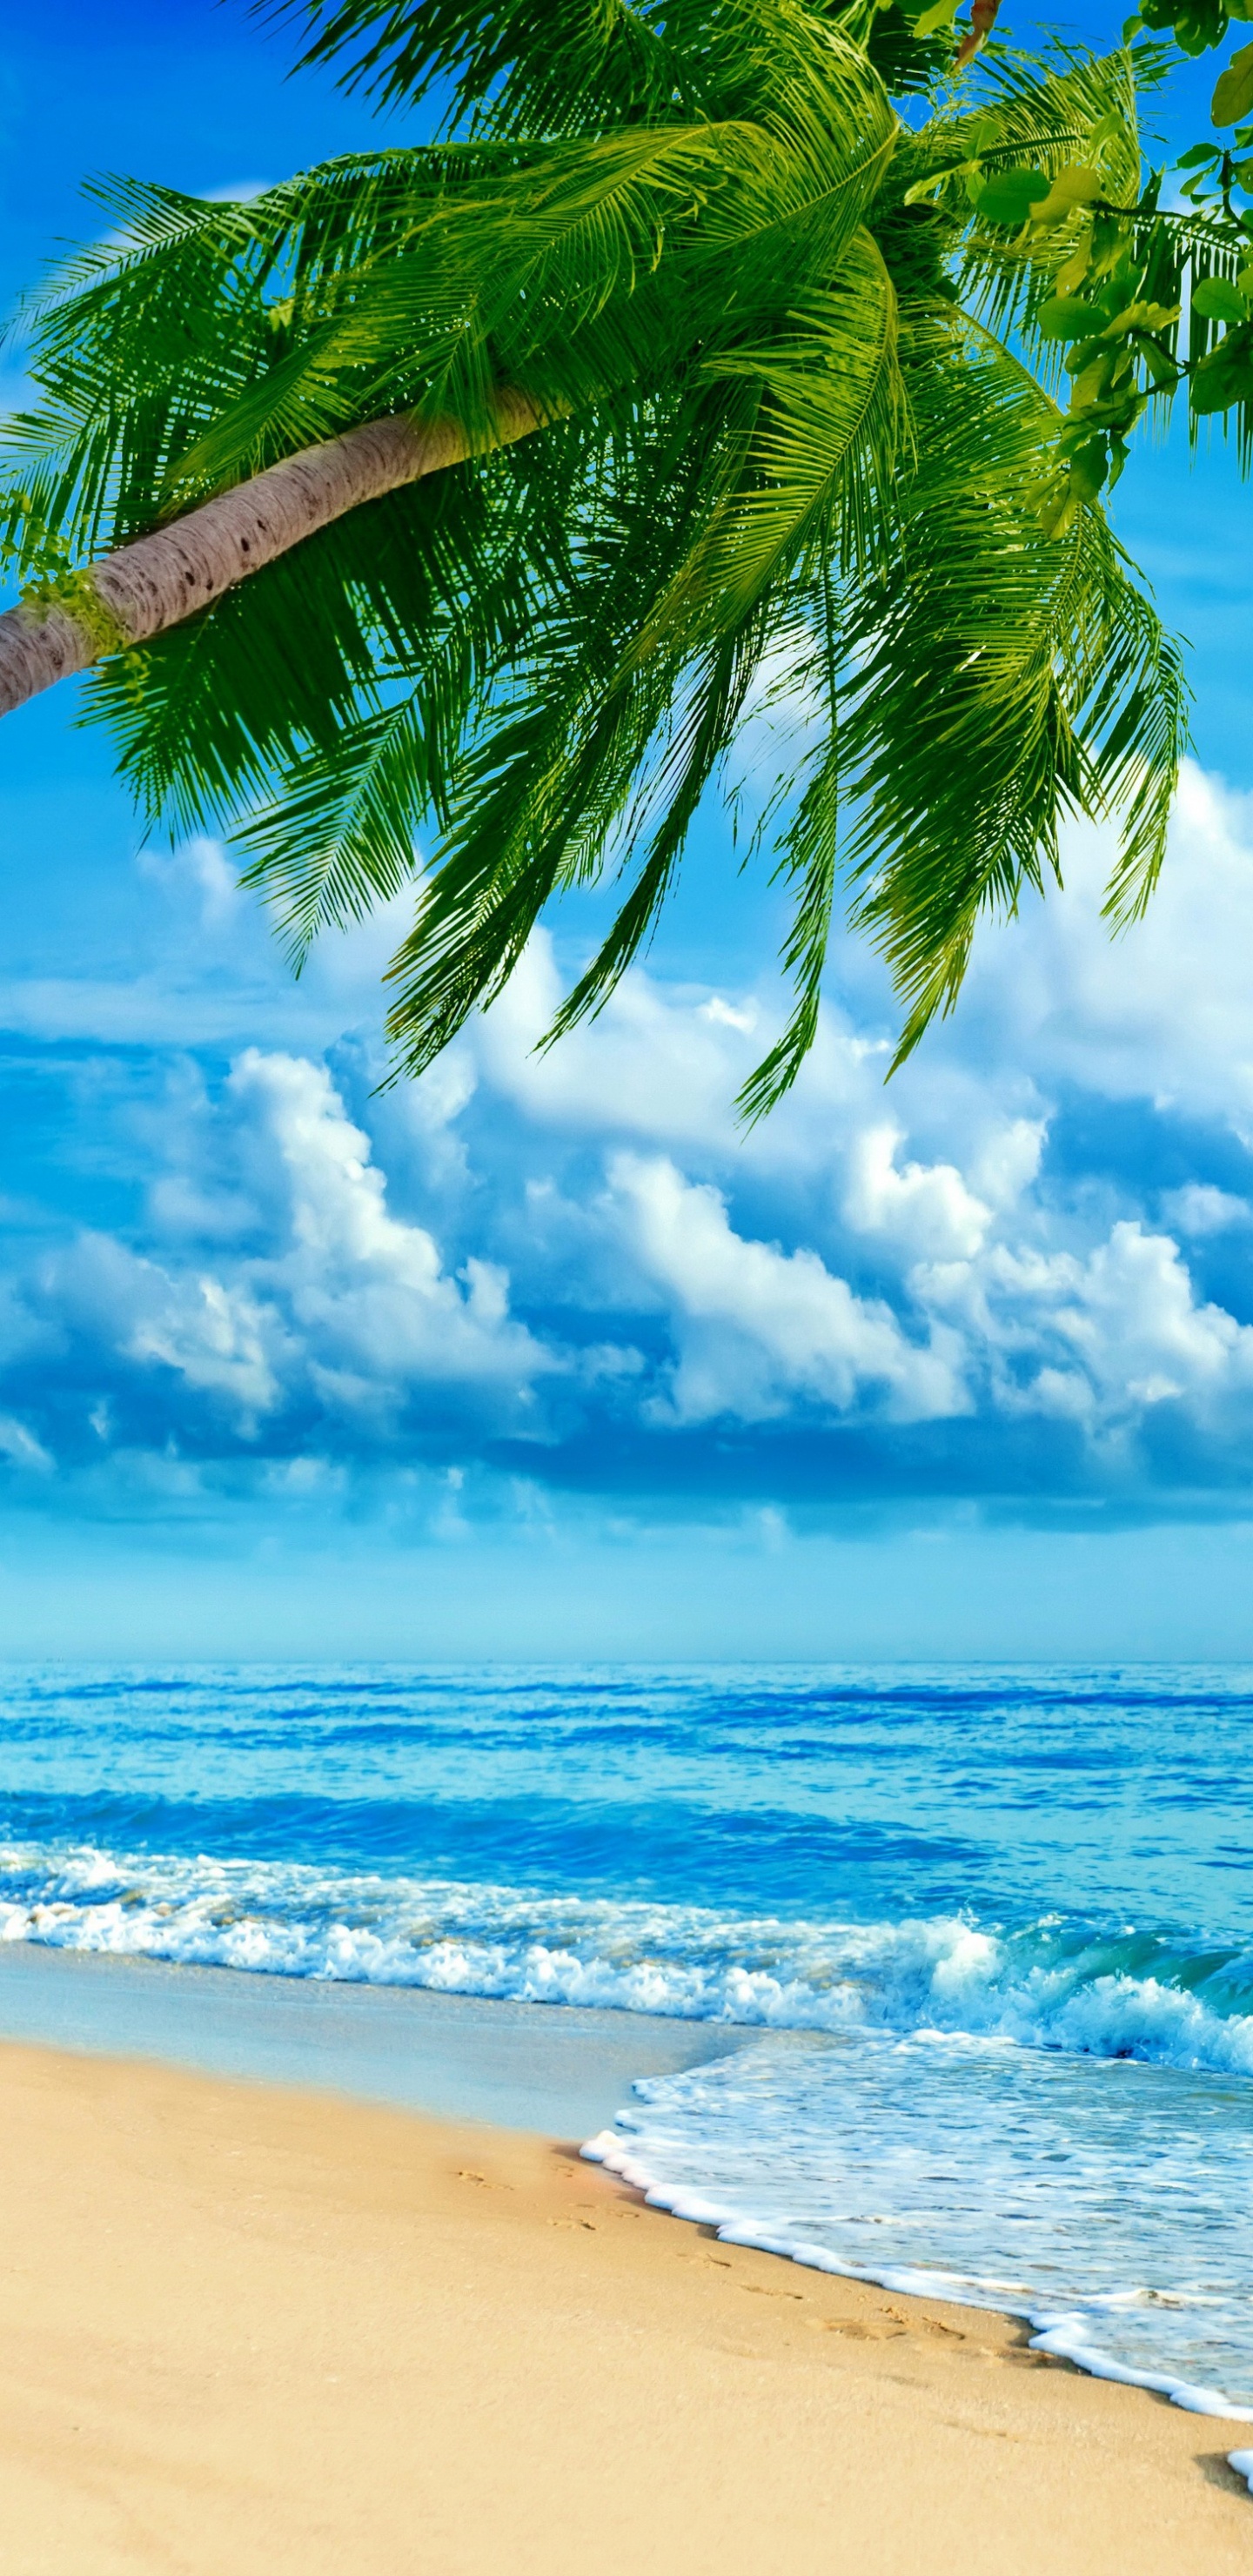 Palm Tree on Beach Shore During Daytime. Wallpaper in 1440x2960 Resolution